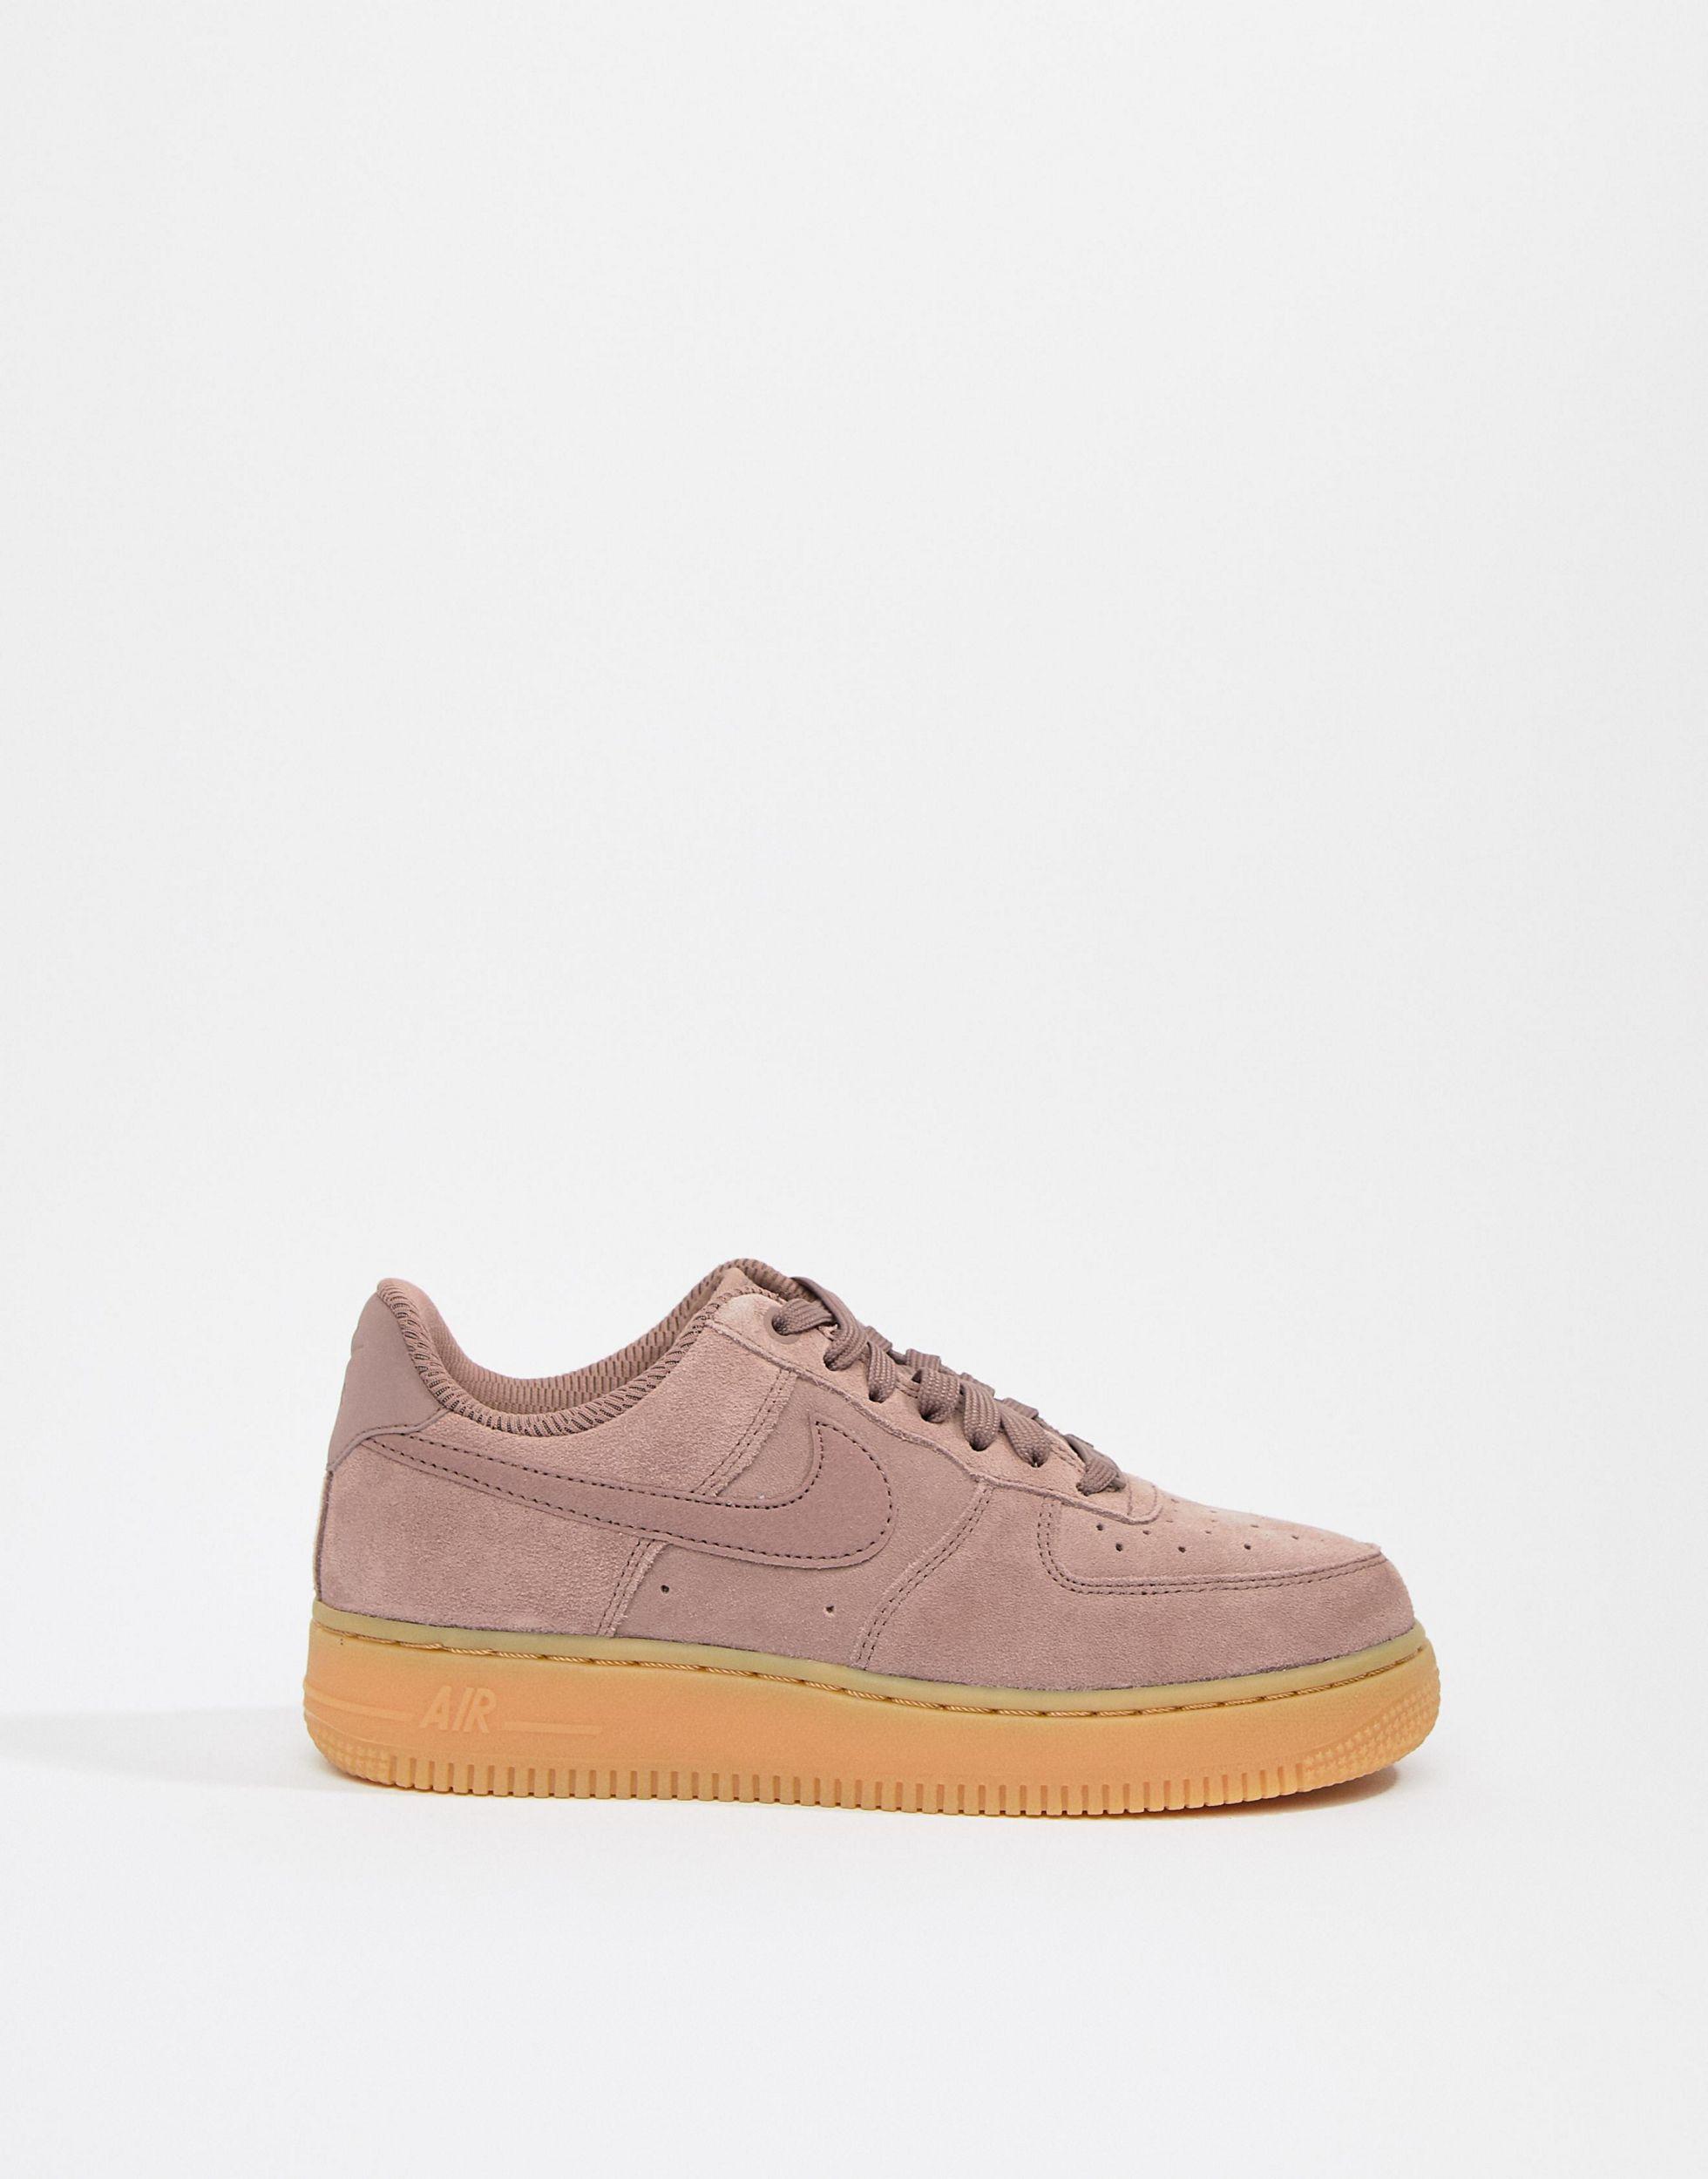 Nike Mauve Air Force 1 Trainers With Gum Sole in Purple | Lyst